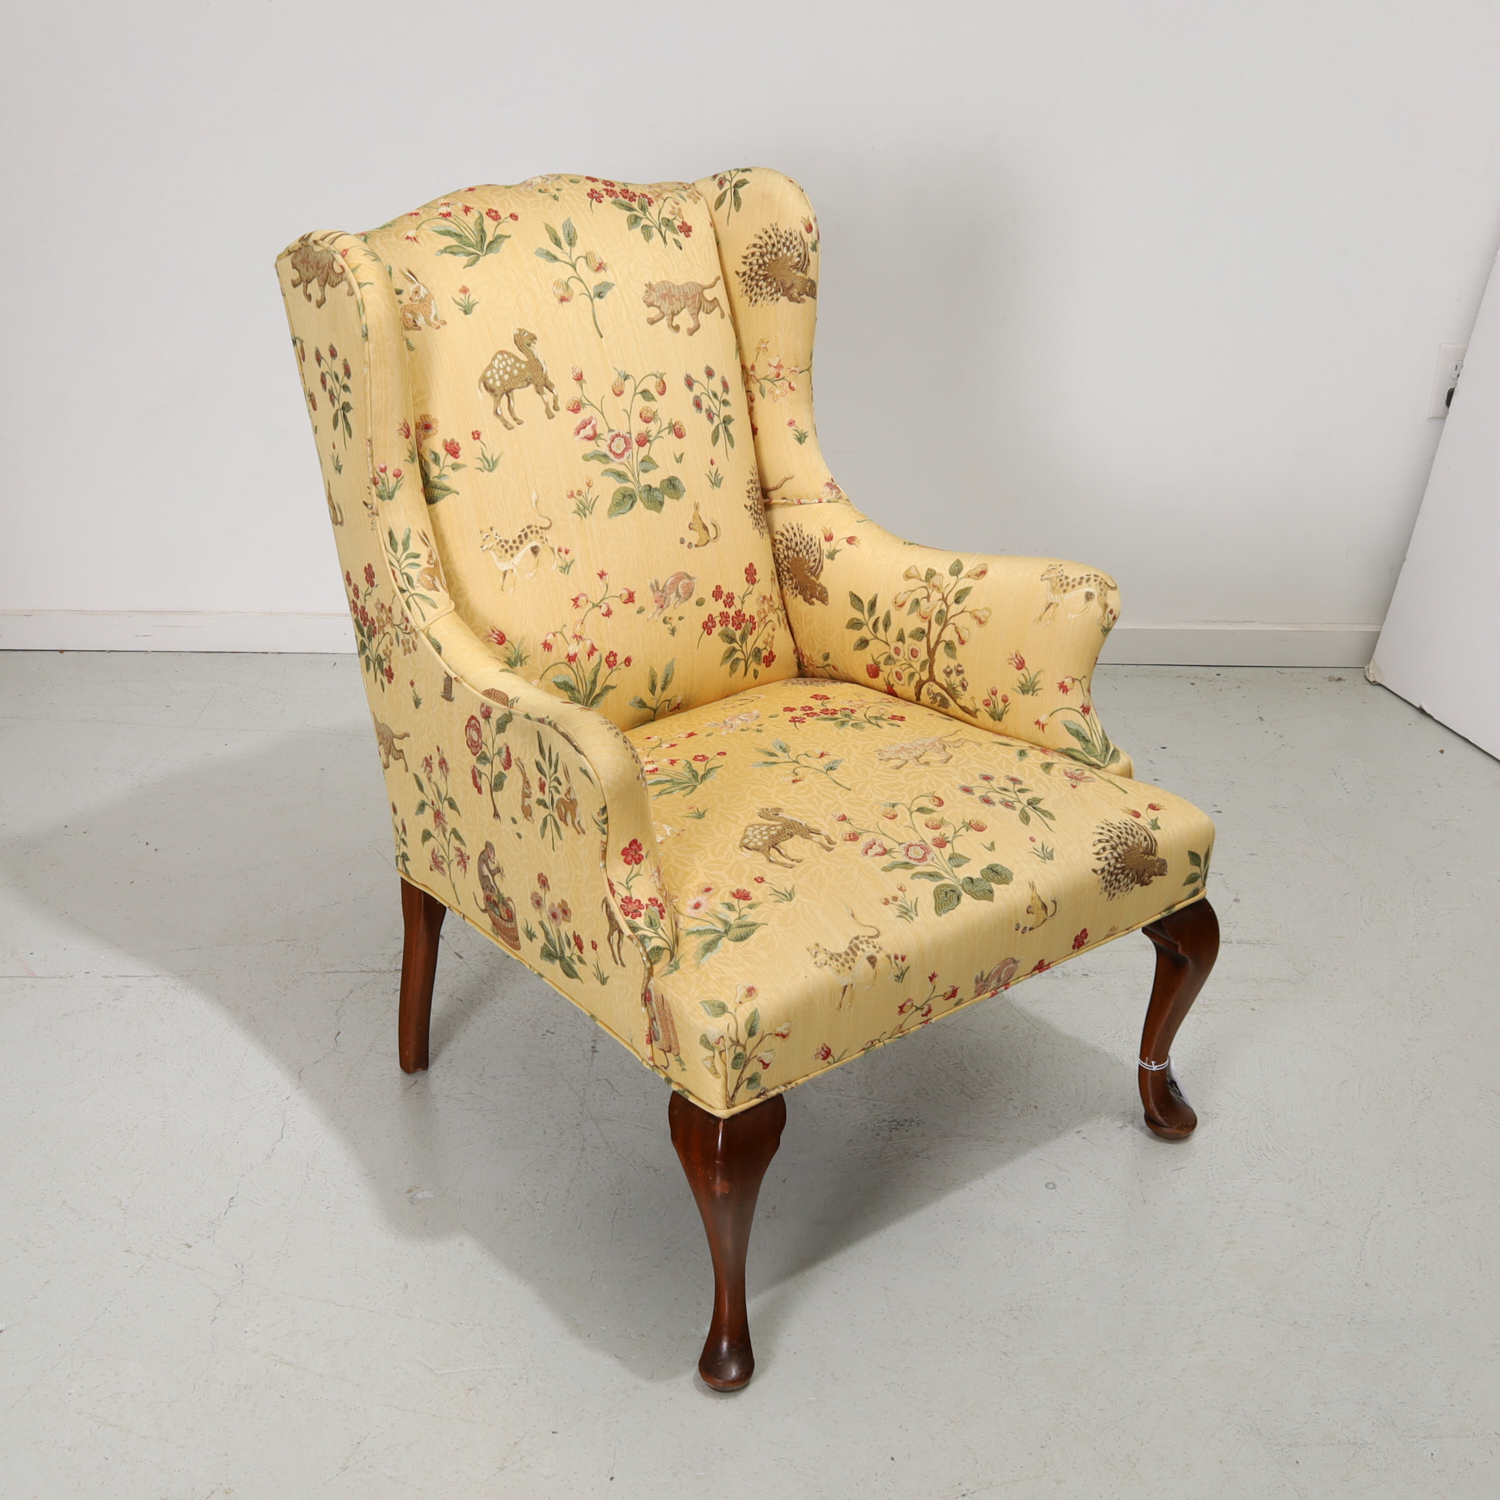 QUEEN ANNE STYLE WING CHAIR SCALAMANDRE 361691